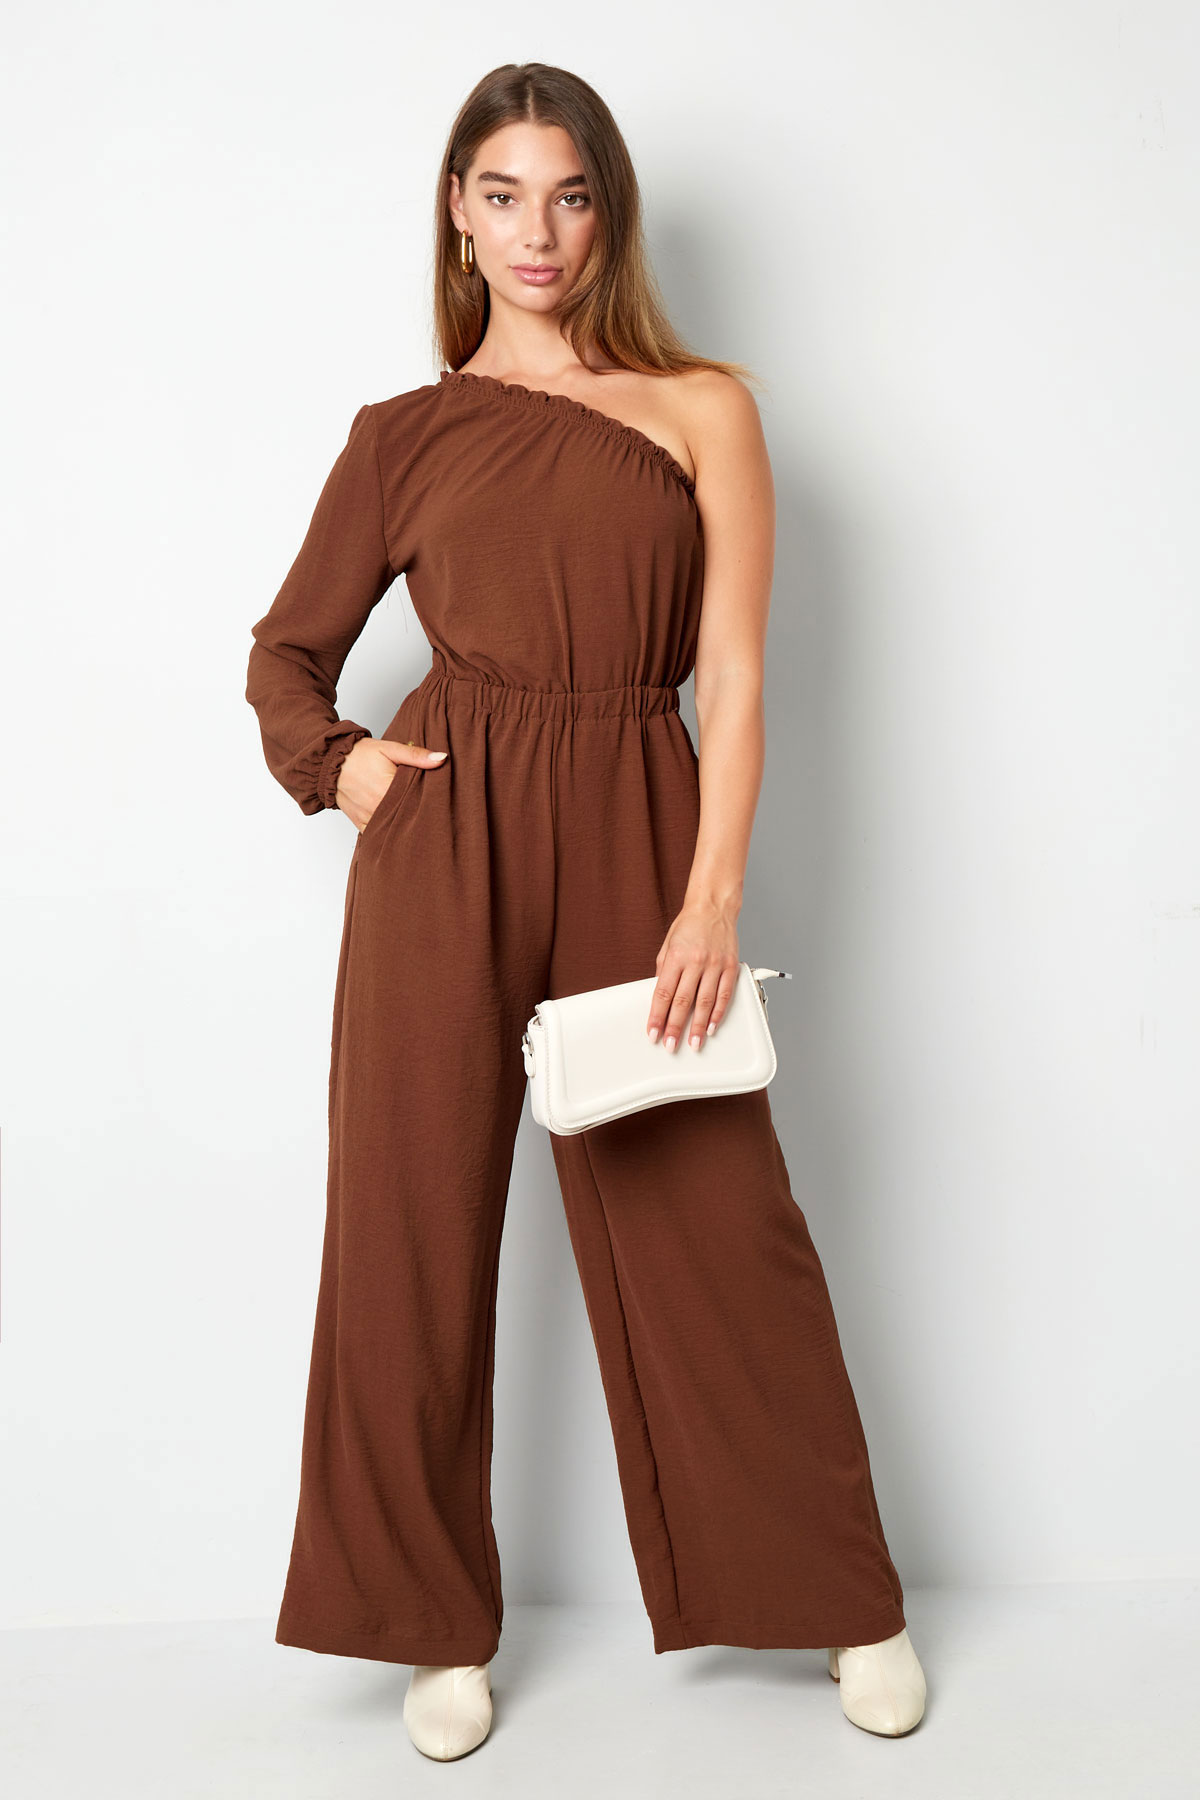 Jumpsuit one-shoulder - mustard yellow h5 Picture6